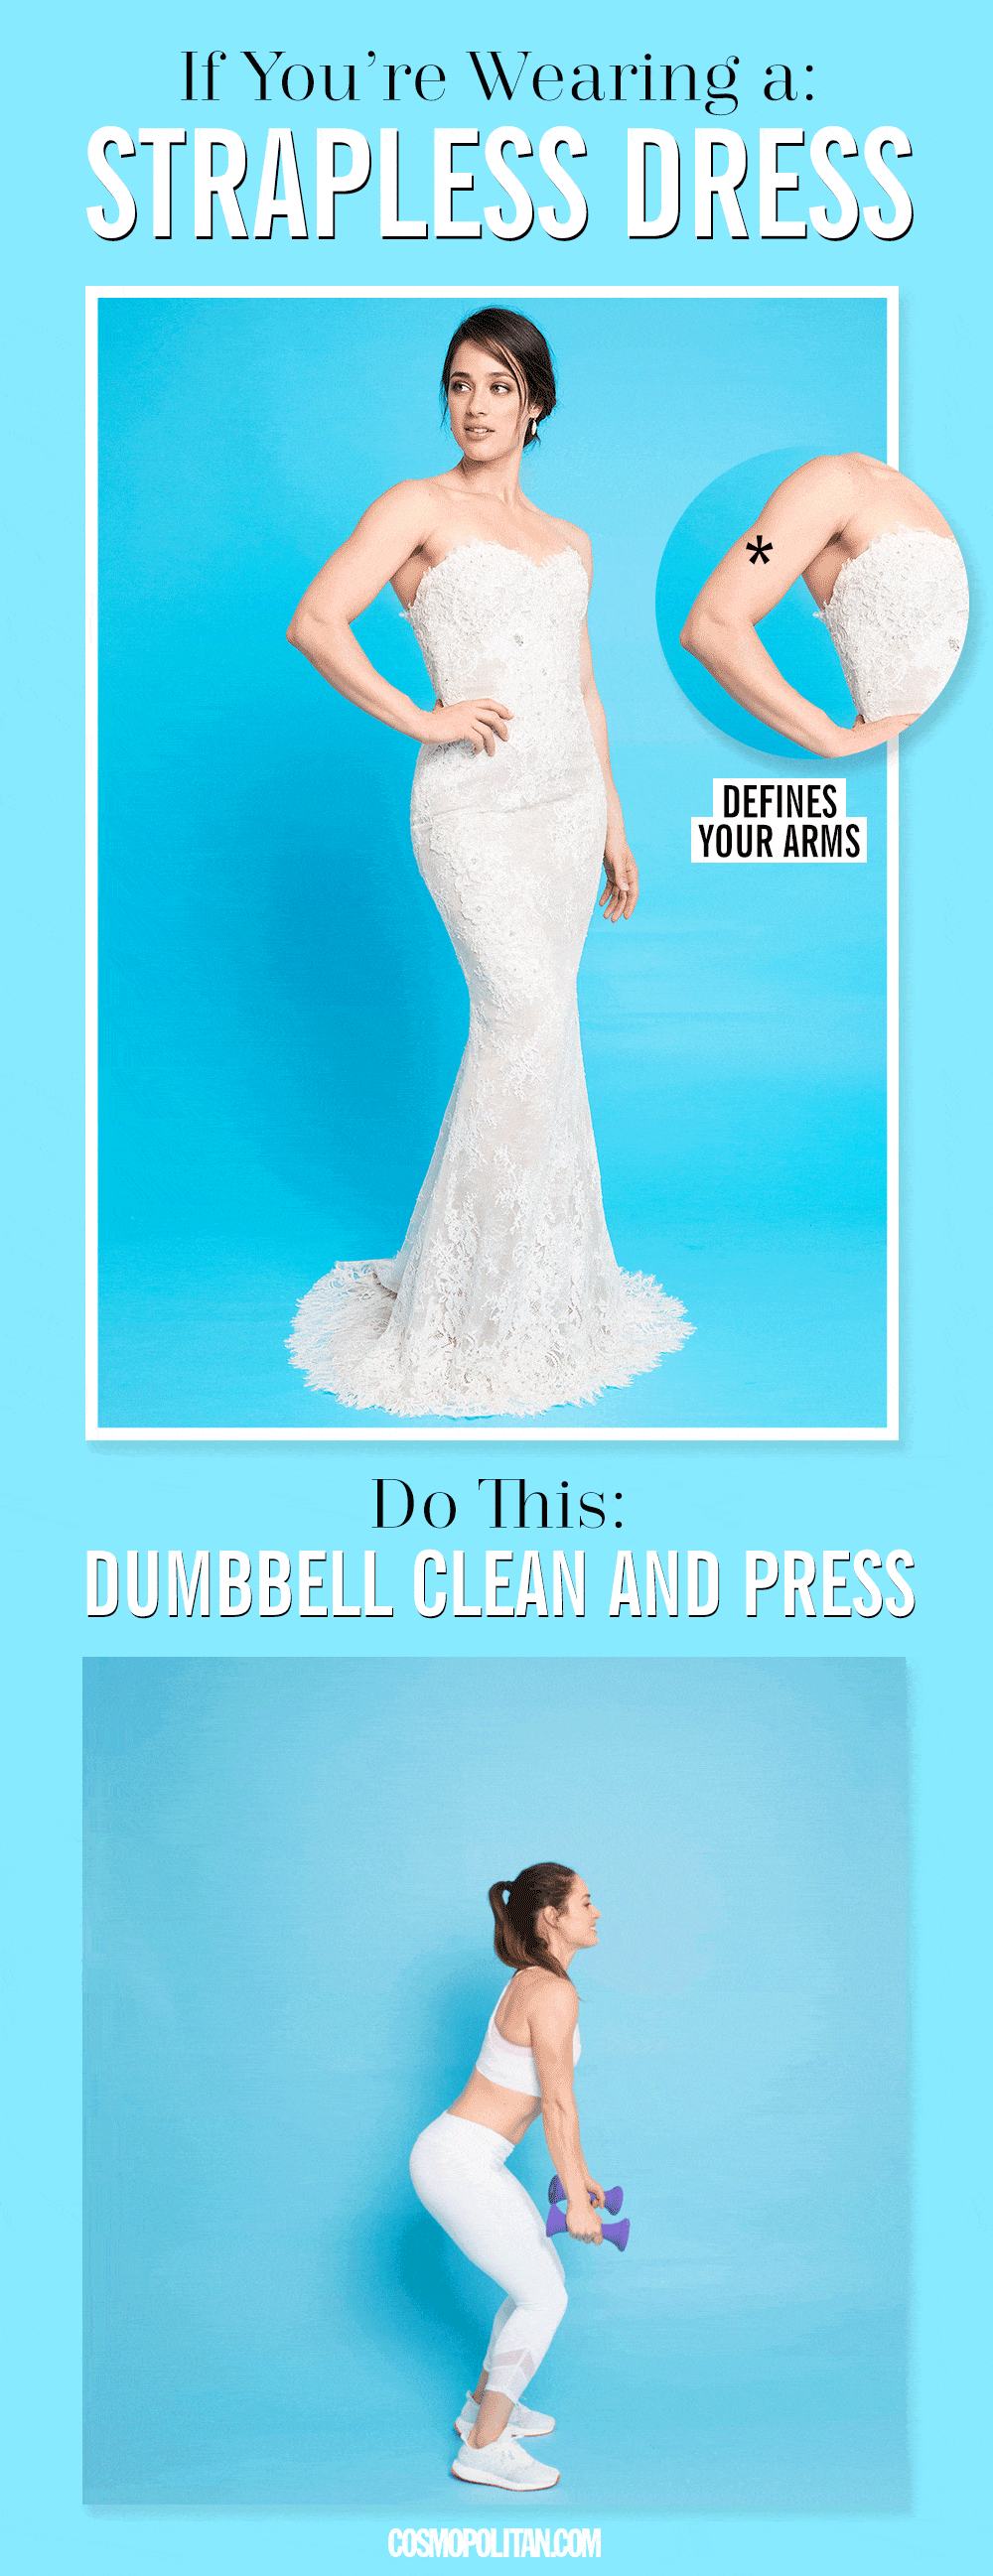 How To Wear A Strapless Dress